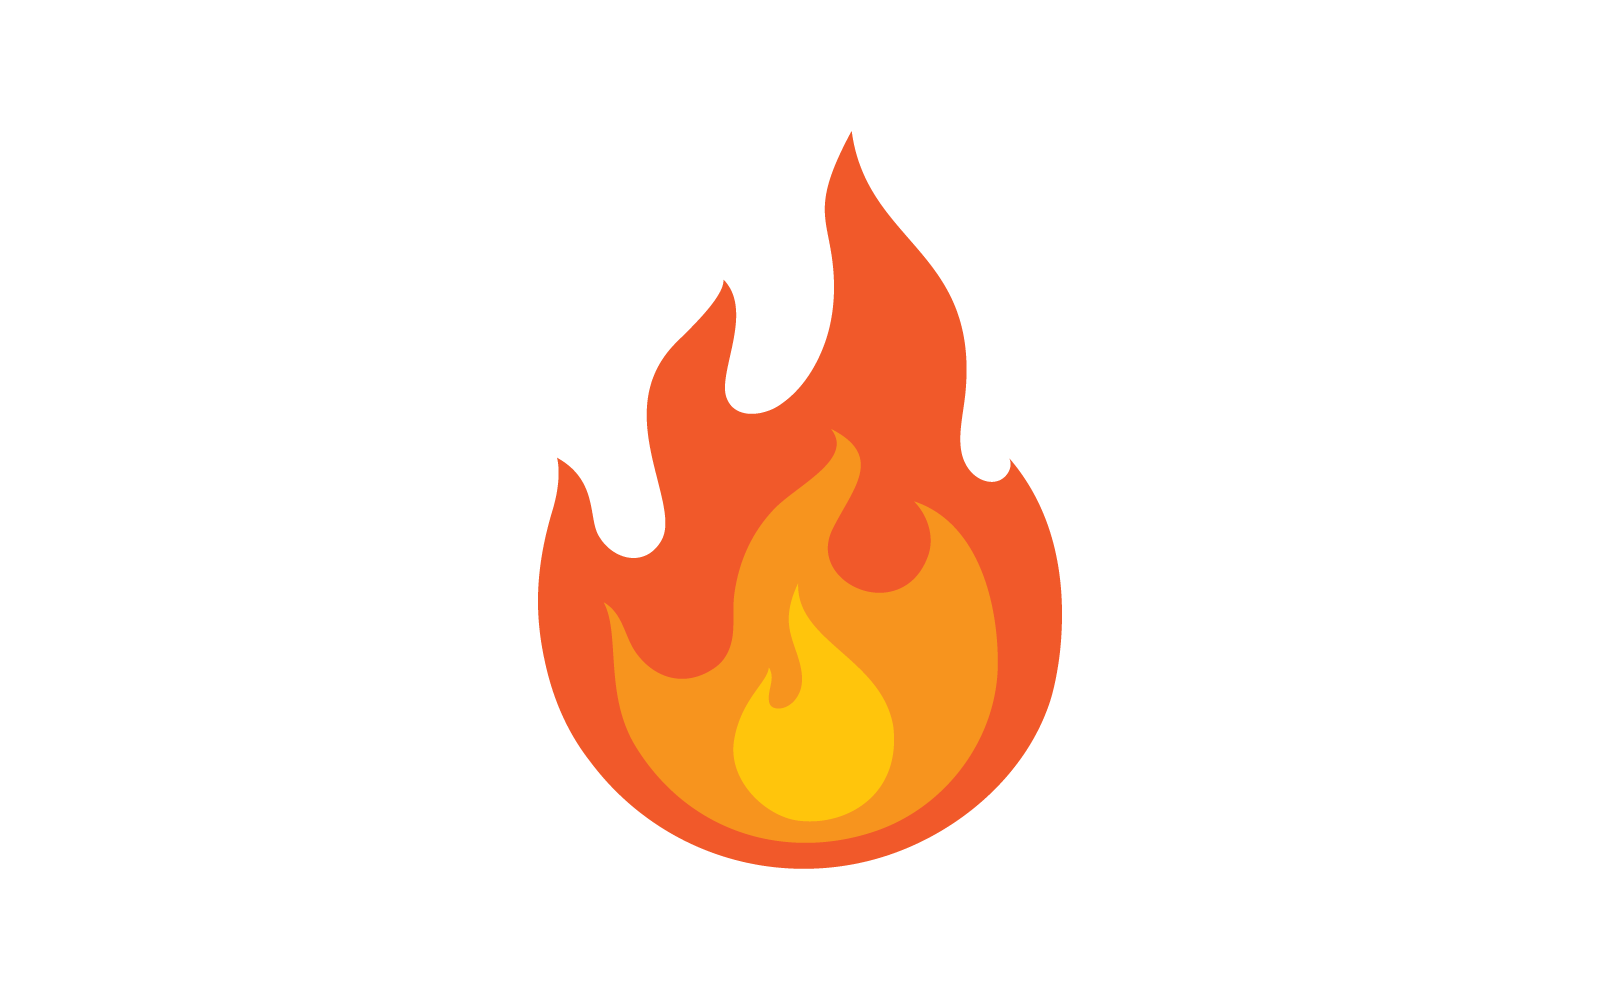 Fire flame Logo vector, Oil, gas and energy logo illustration